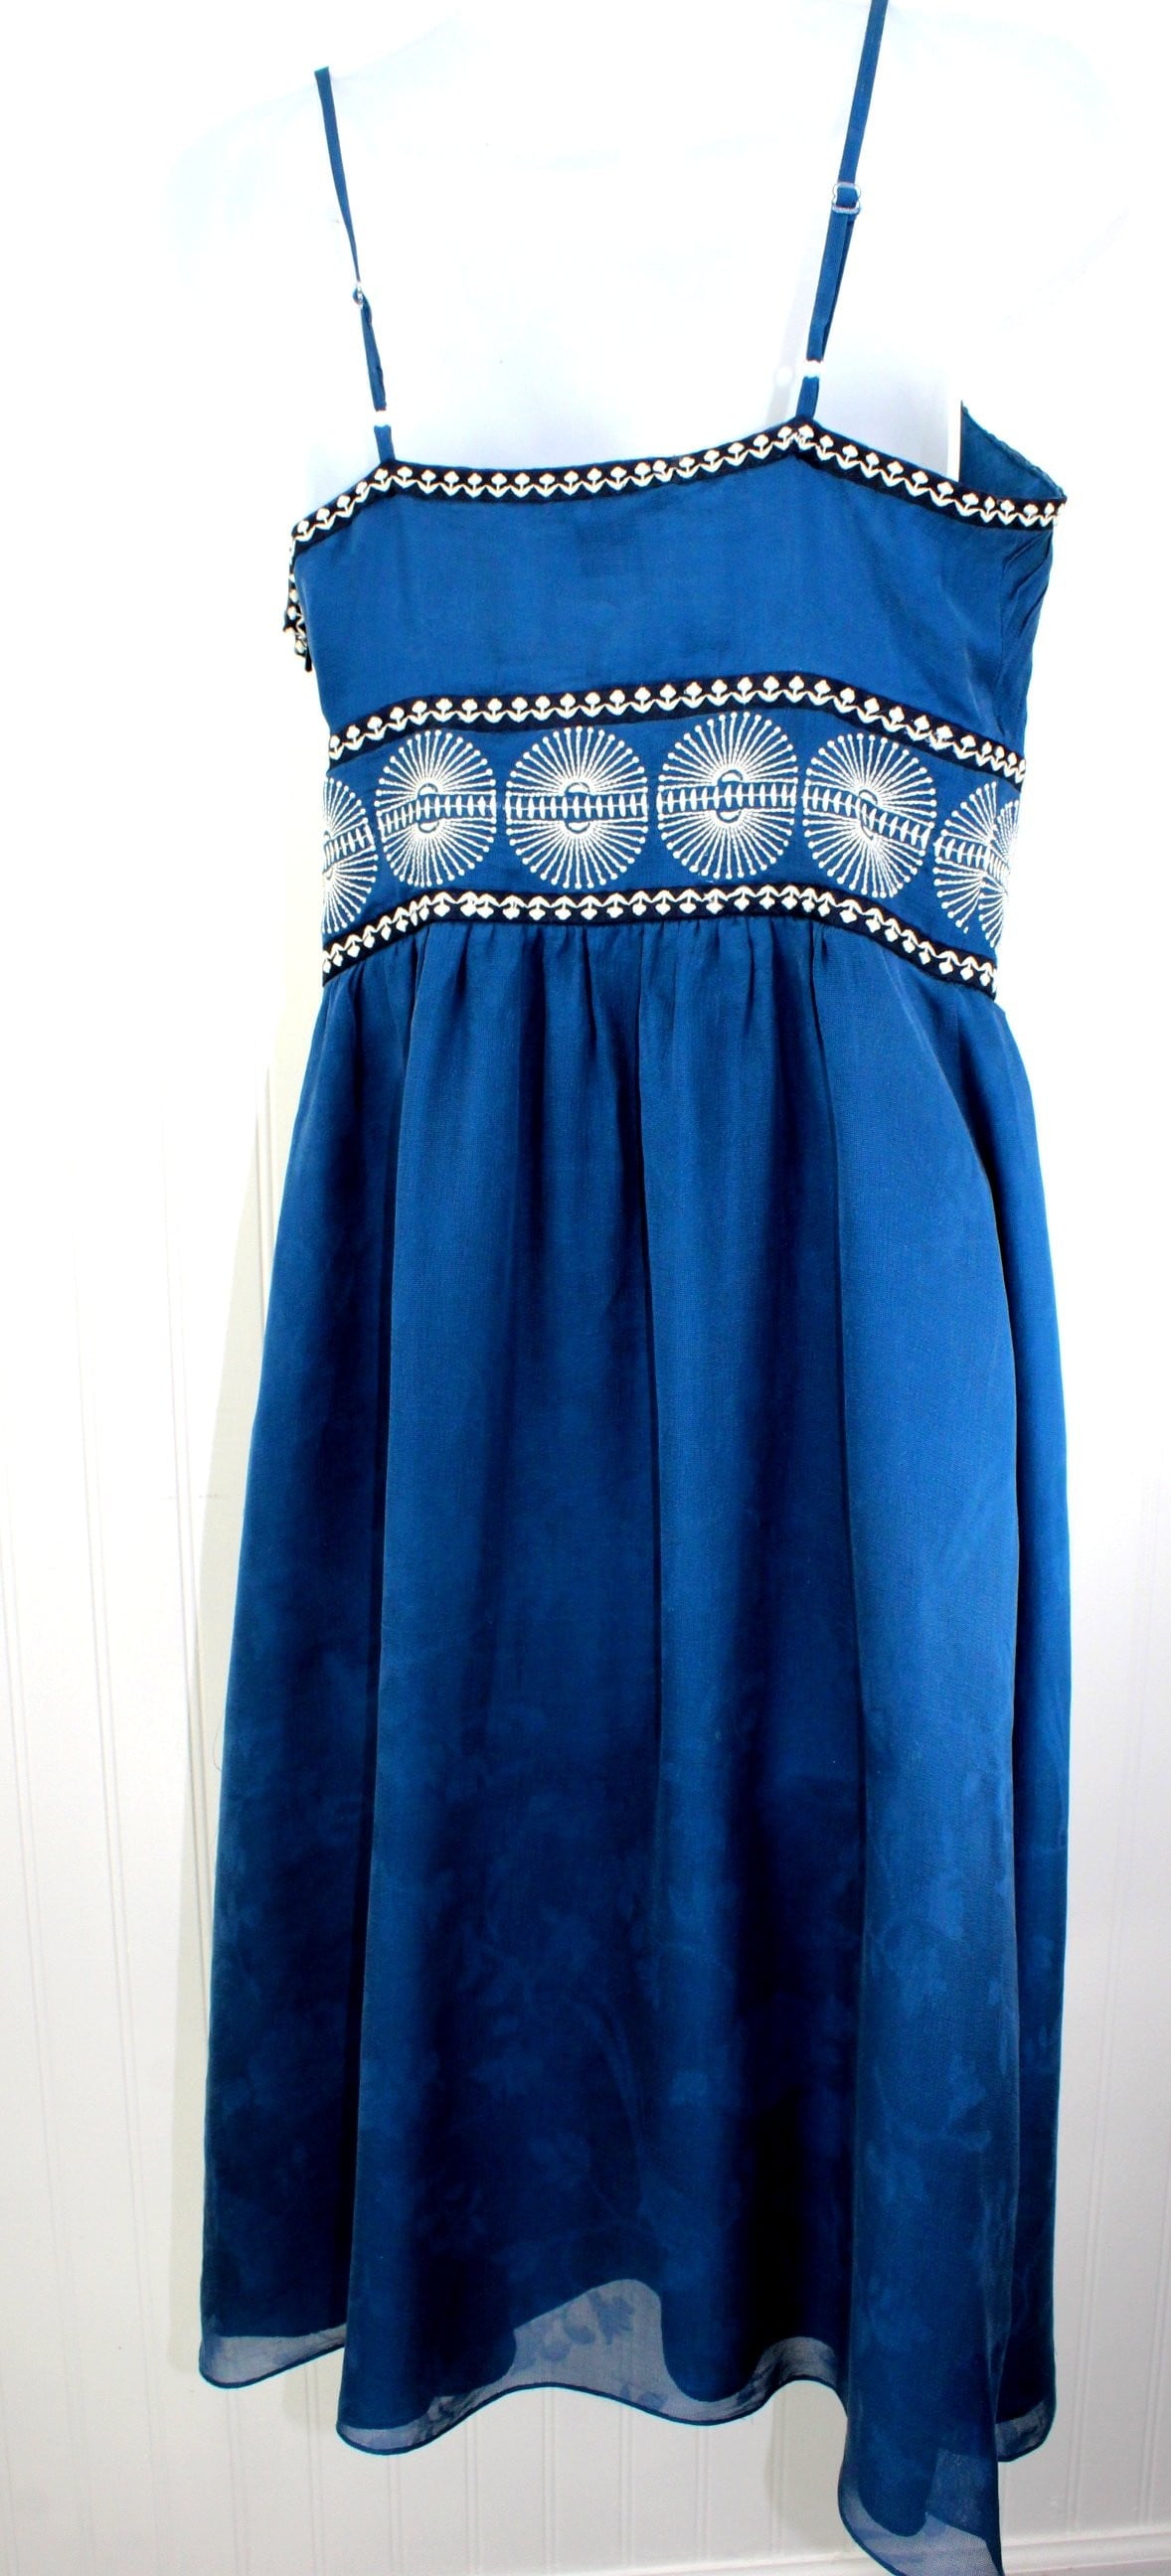 Shanghai Tang Silk Party Dress Blue with White Embroidery US10 Tag white embroidery trim